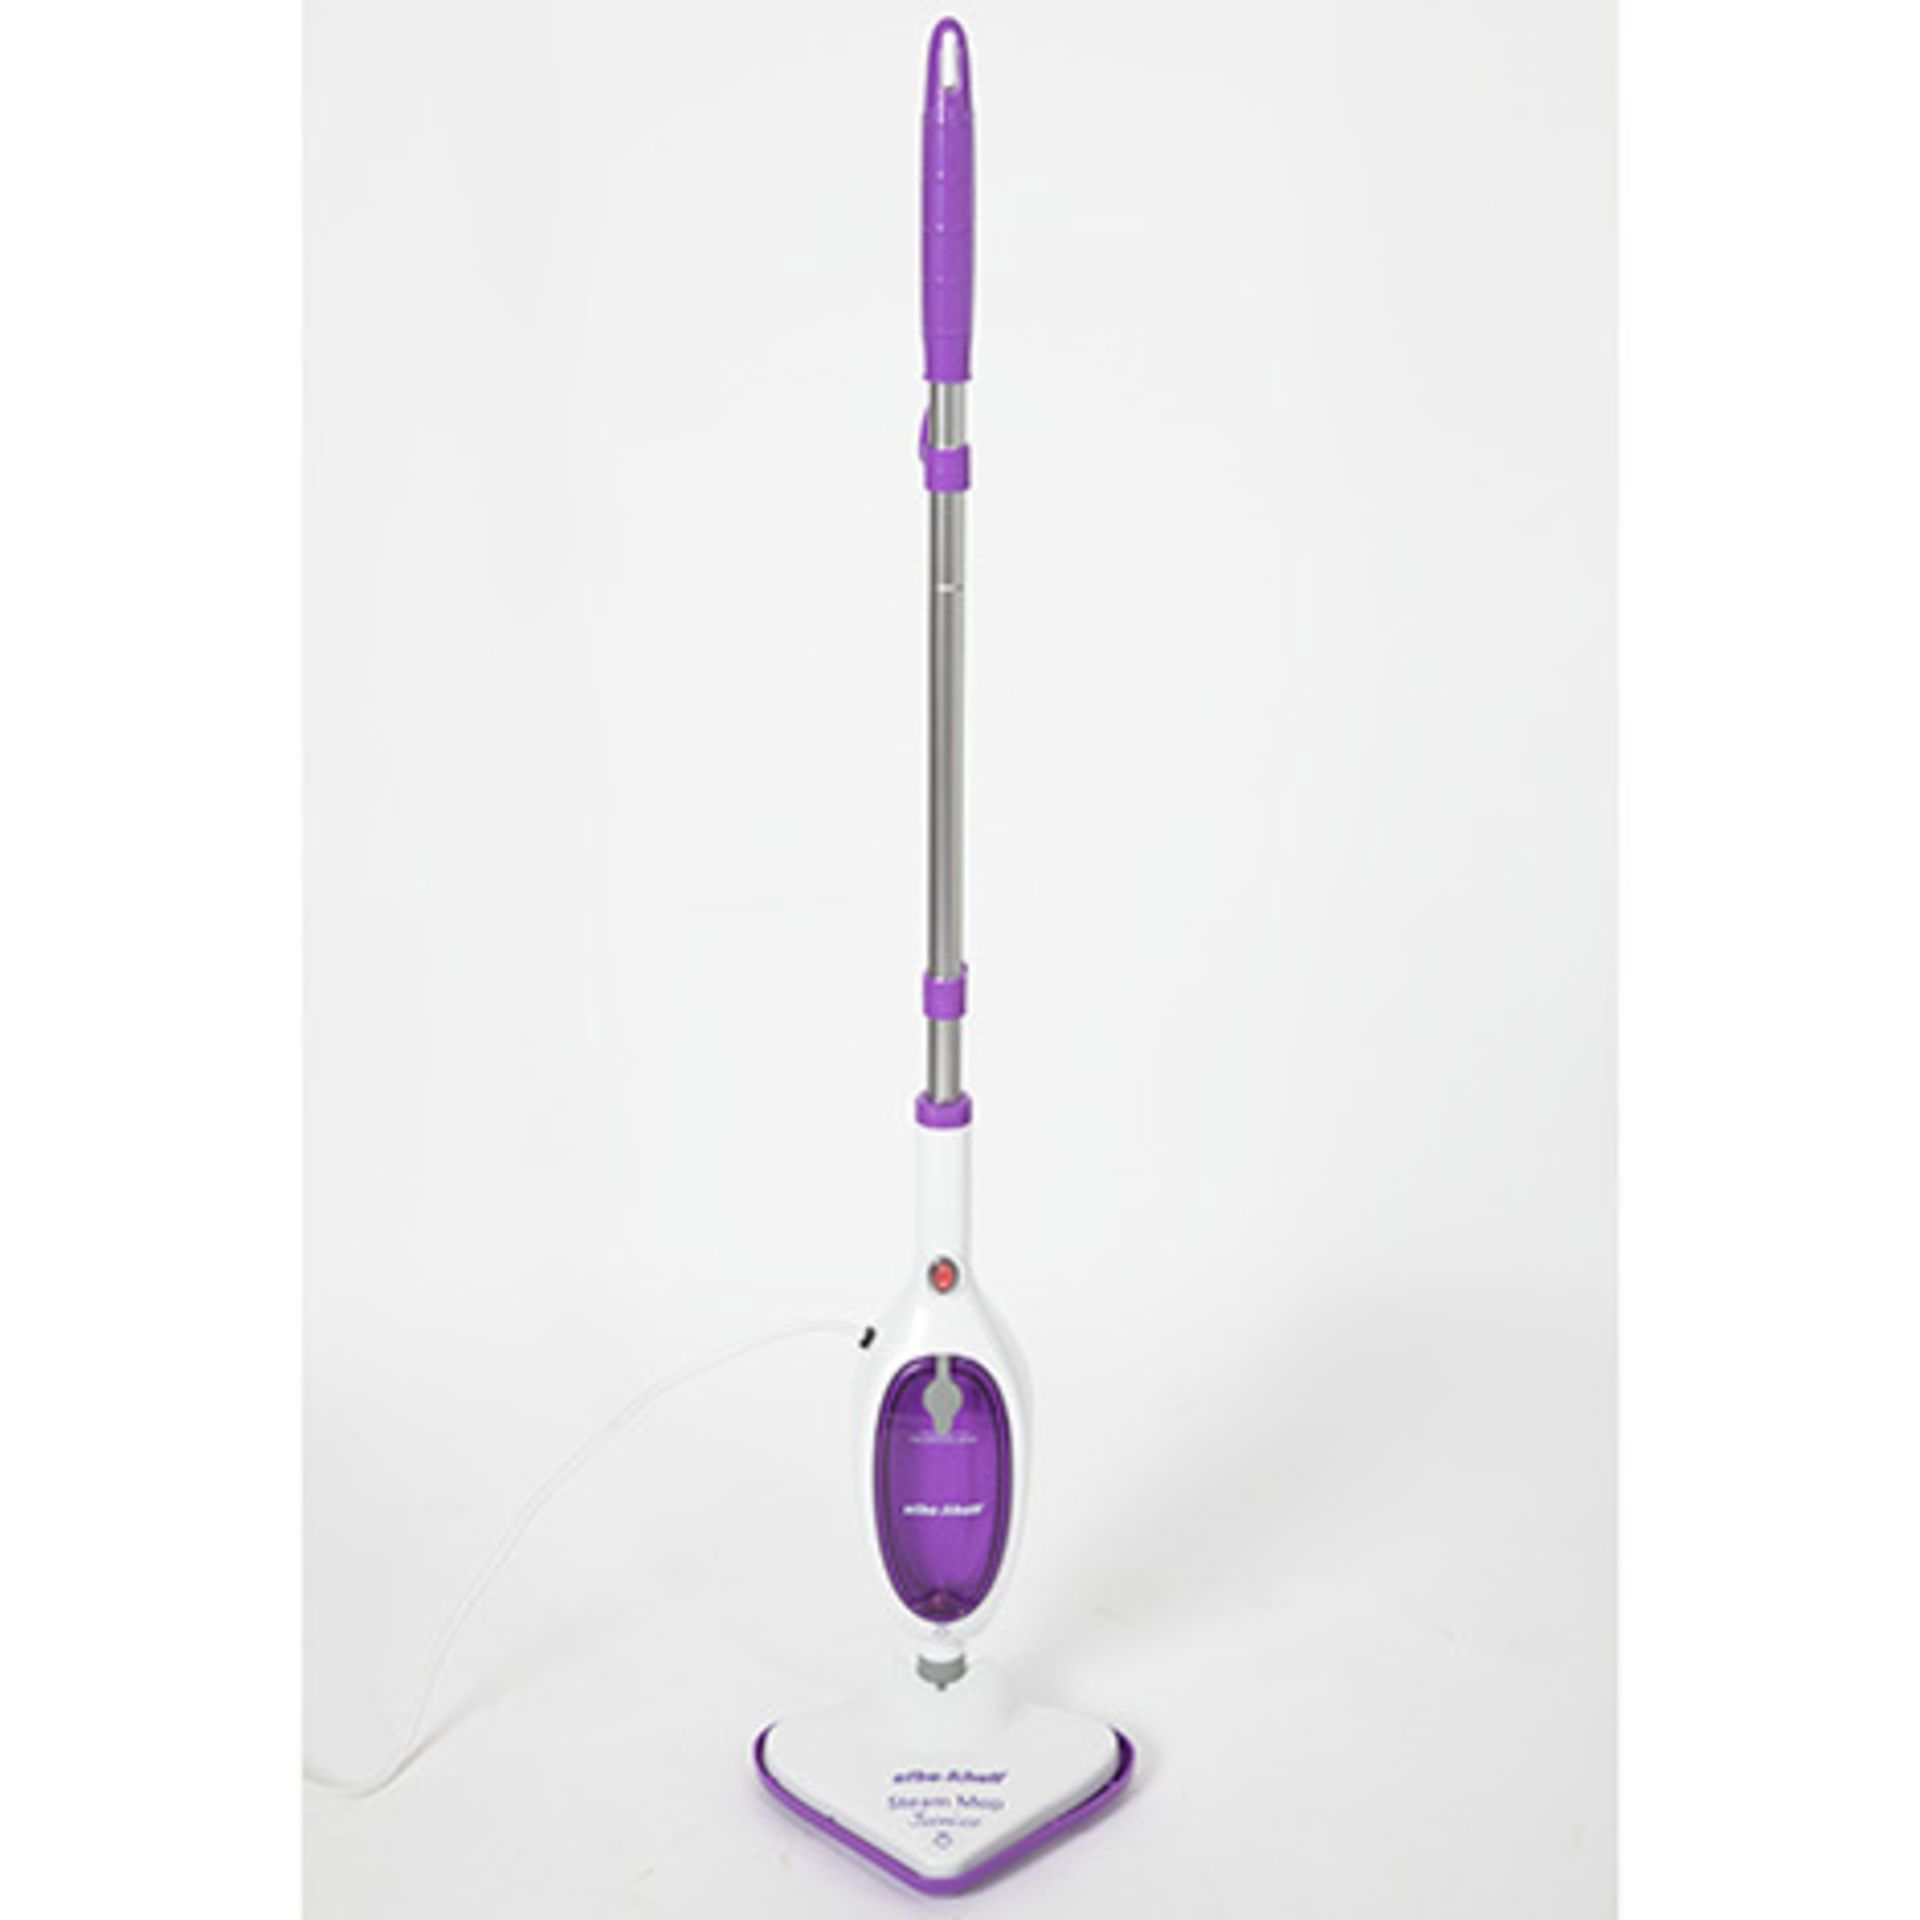 V Brand New Efbe-Schott Steam Mop (New And Boxed) Colours And Model May Vary RRP59.99 X 2 YOUR BID - Image 2 of 2